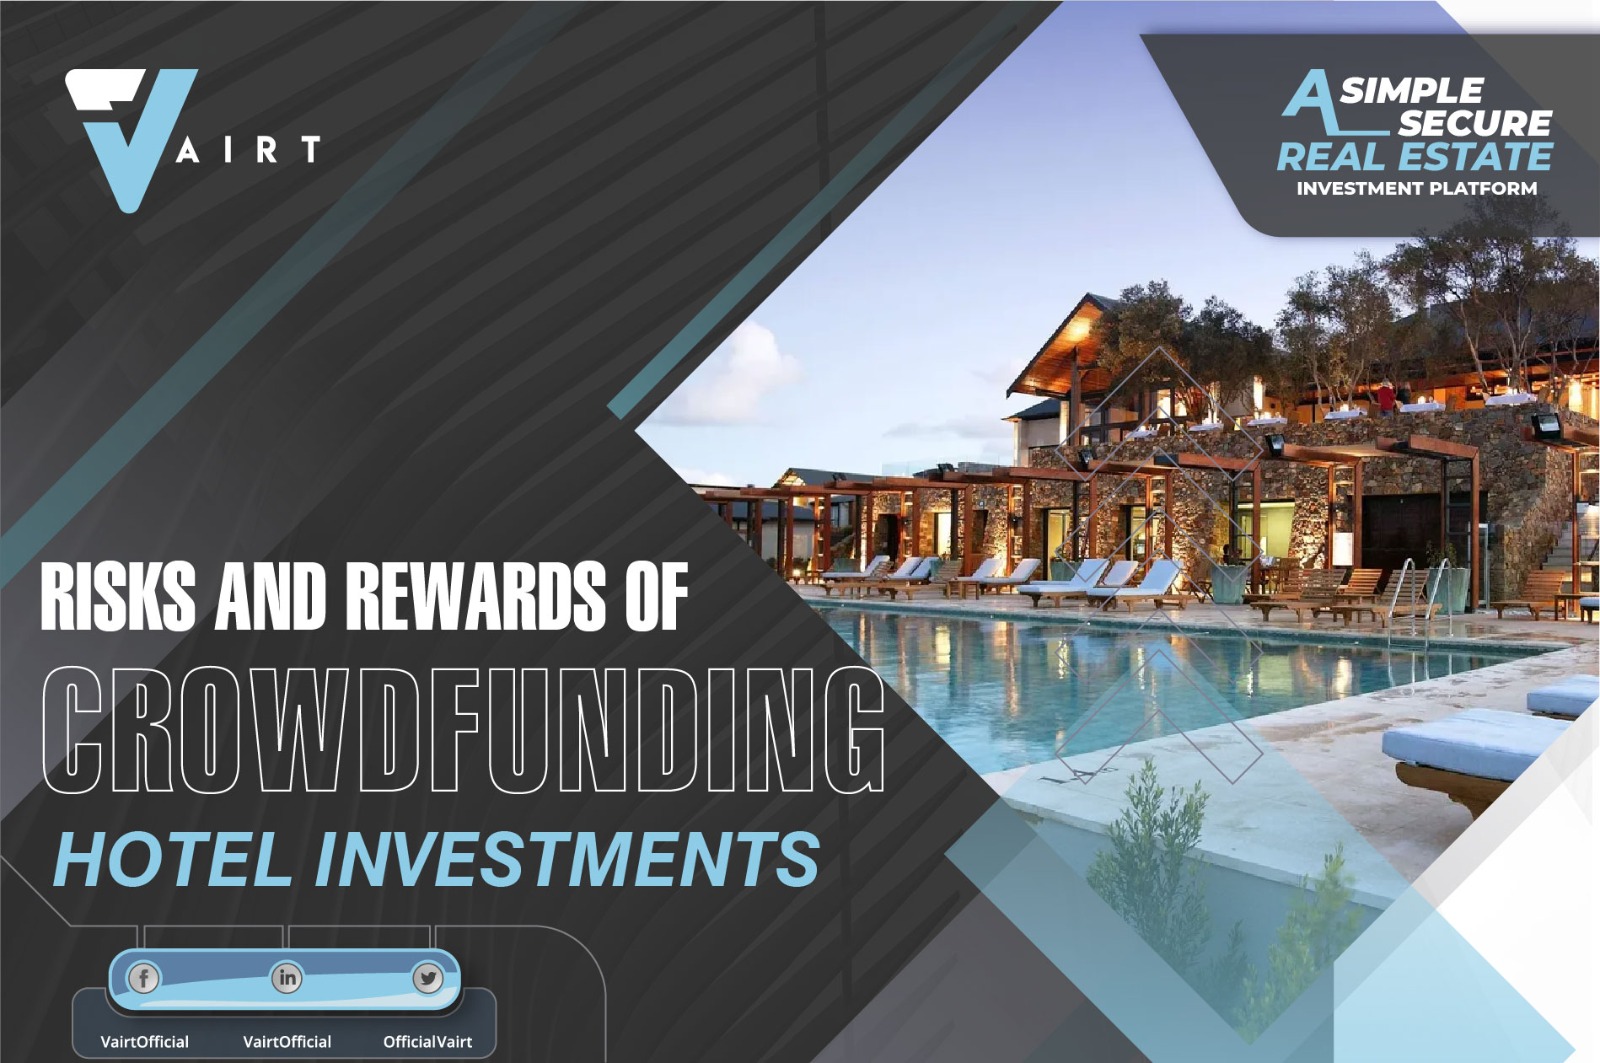 Crowdfunding Hotel Investment